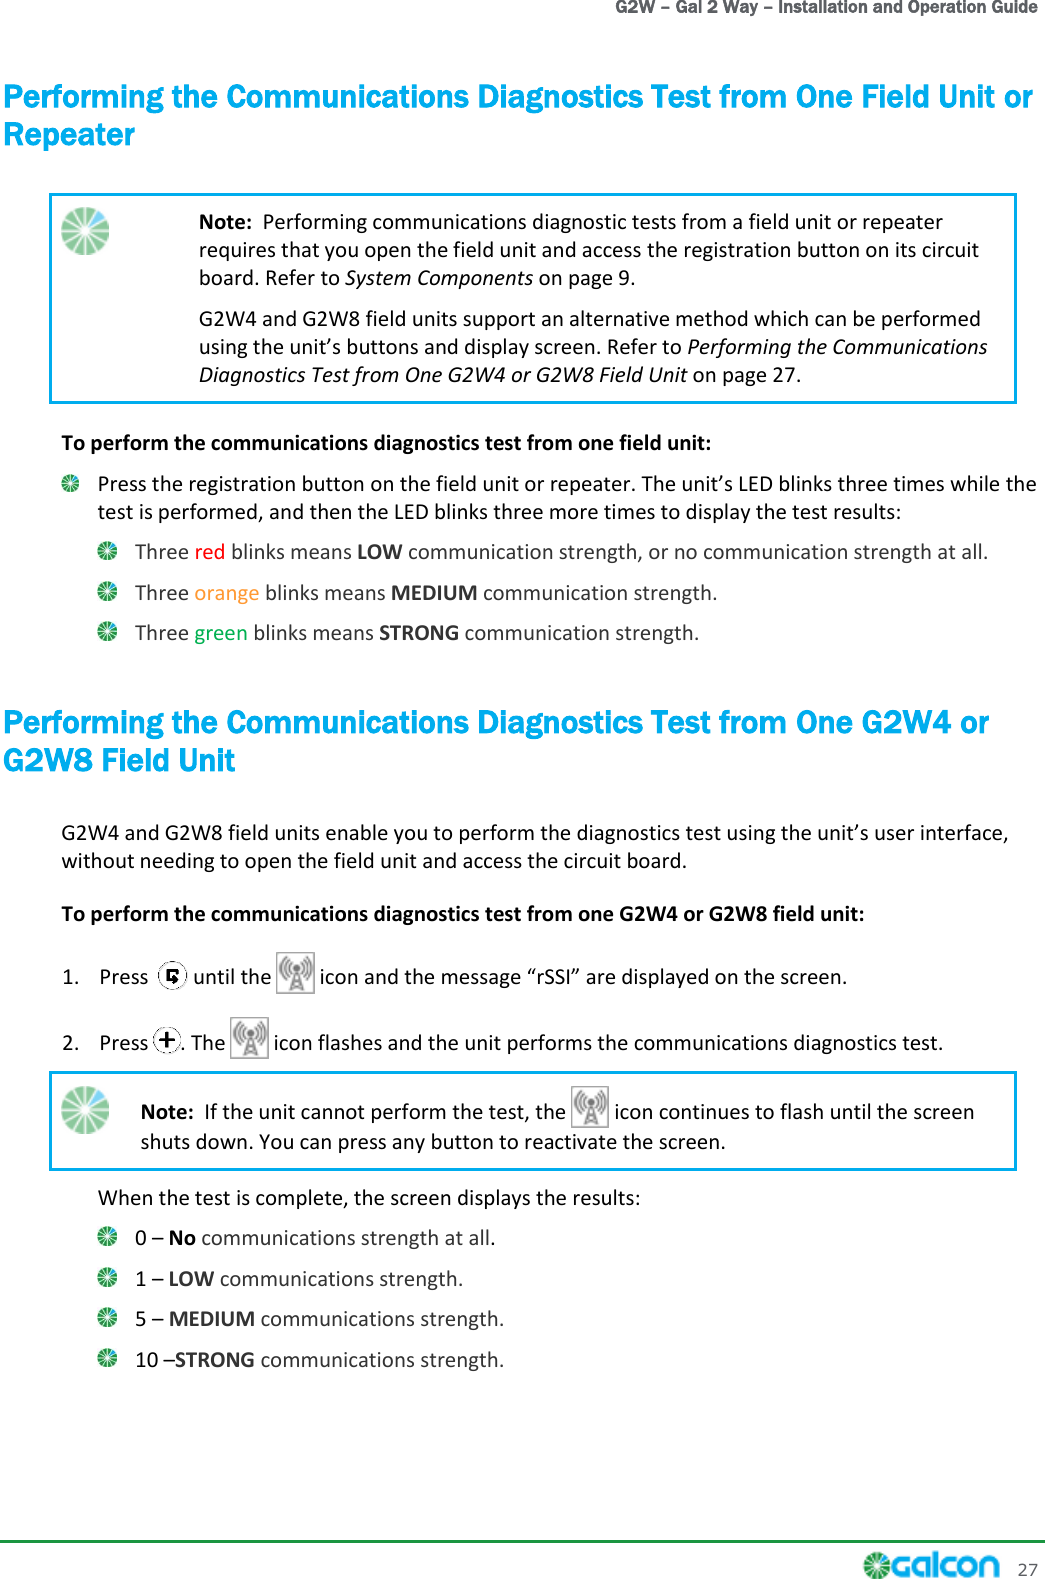   G2W – Gal 2 Way – Installation and Operation Guide     27 Performing the Communications Diagnostics Test from One Field Unit or Repeater  Note:  Performing communications diagnostic tests from a field unit or repeater requires that you open the field unit and access the registration button on its circuit board. Refer to System Components on page 9. G2W4 and G2W8 field units support an alternative method which can be performed Performing the Communications Diagnostics Test from One G2W4 or G2W8 Field Unit on page 27. To perform the communications diagnostics test from one field unit:  Press the registration button on the field unit or repeater. The LED blinks three times while the test is performed, and then the LED blinks three more times to display the test results:  Three red blinks means LOW communication strength, or no communication strength at all.  Three orange blinks means MEDIUM communication strength.  Three green blinks means STRONG communication strength. Performing the Communications Diagnostics Test from One G2W4 or G2W8 Field Unit G2W4 and G2W8 field units enable you to perform the diagnostics test usinwithout needing to open the field unit and access the circuit board. To perform the communications diagnostics test from one G2W4 or G2W8 field unit: 1. Press   until the   icon and the message rSSI are displayed on the screen. 2. Press . The   icon flashes and the unit performs the communications diagnostics test.  Note:  If the unit cannot perform the test, the   icon continues to flash until the screen shuts down. You can press any button to reactivate the screen. When the test is complete, the screen displays the results:  0  No communications strength at all.  1  LOW communications strength.  5  MEDIUM communications strength.  10 STRONG communications strength. 